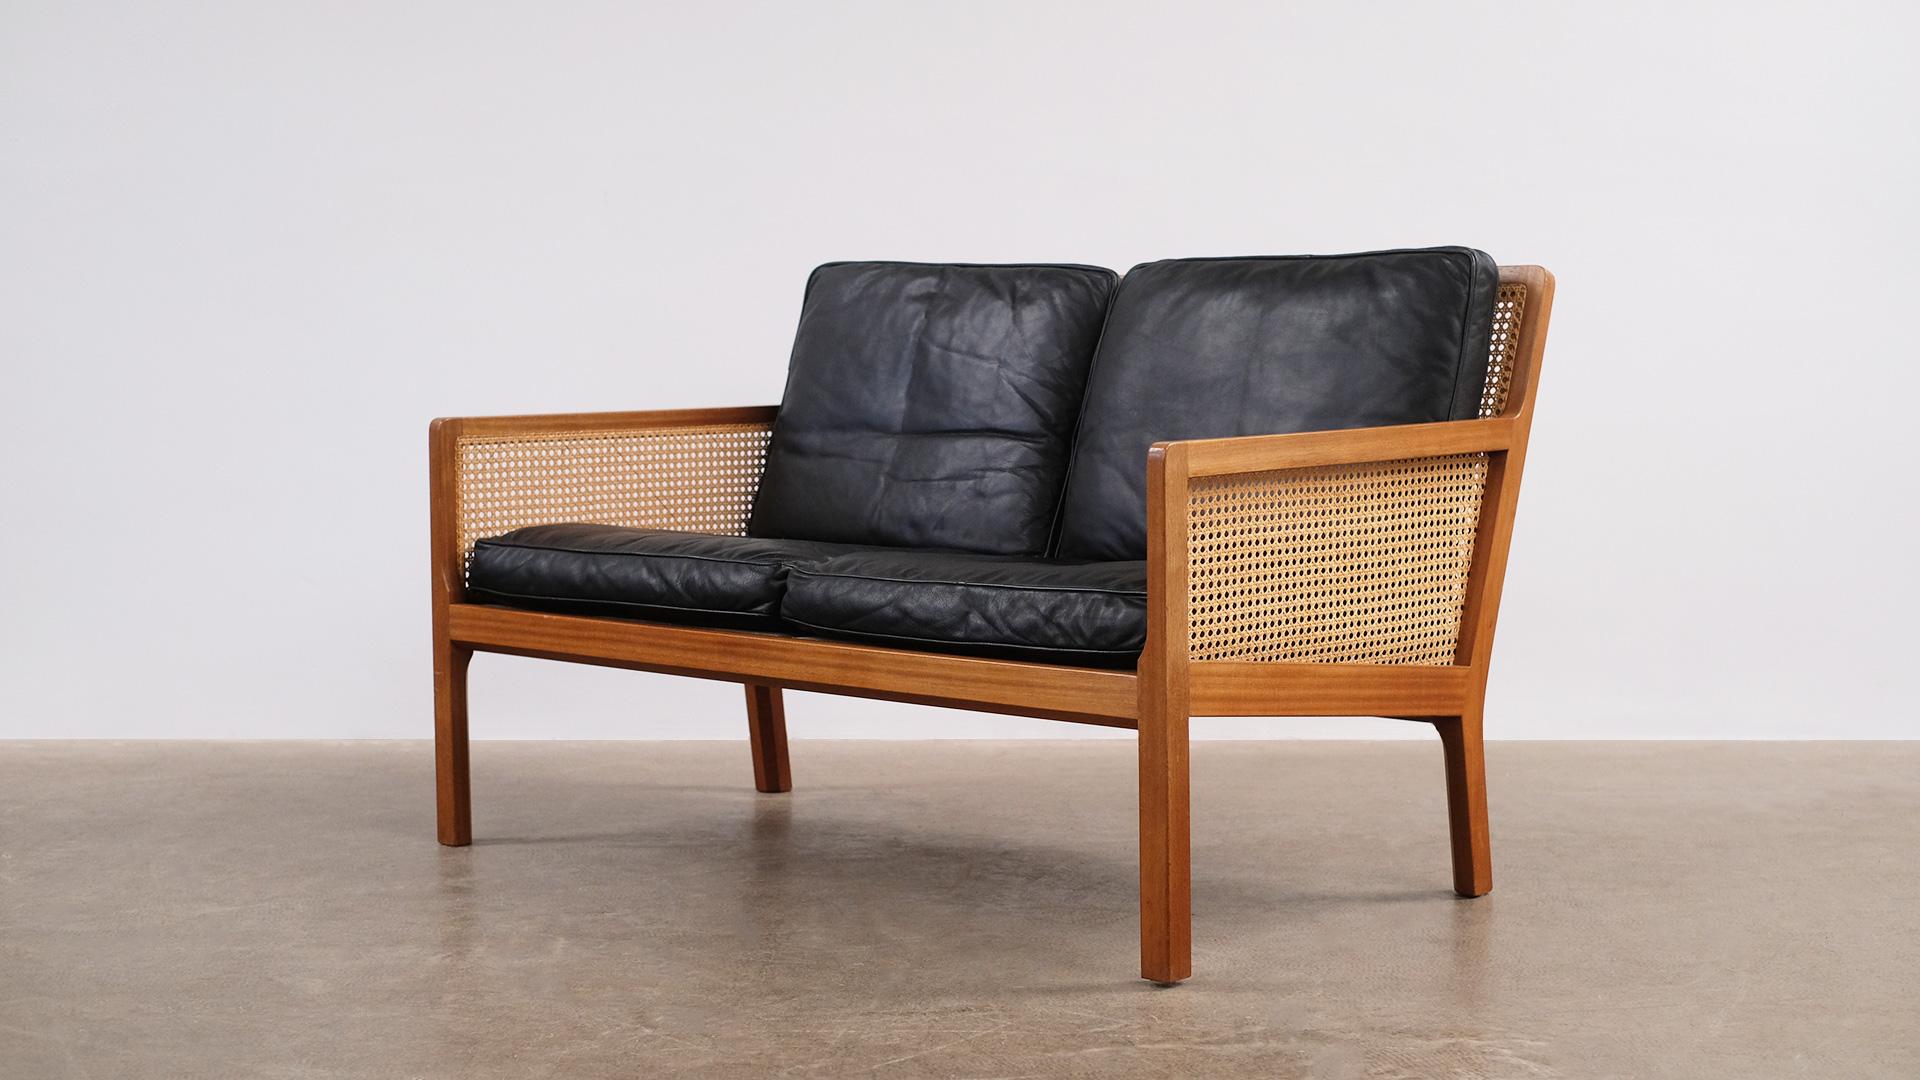 Danish Mahogany, French Cane and Leather Sofa by Bernt Petersen 1